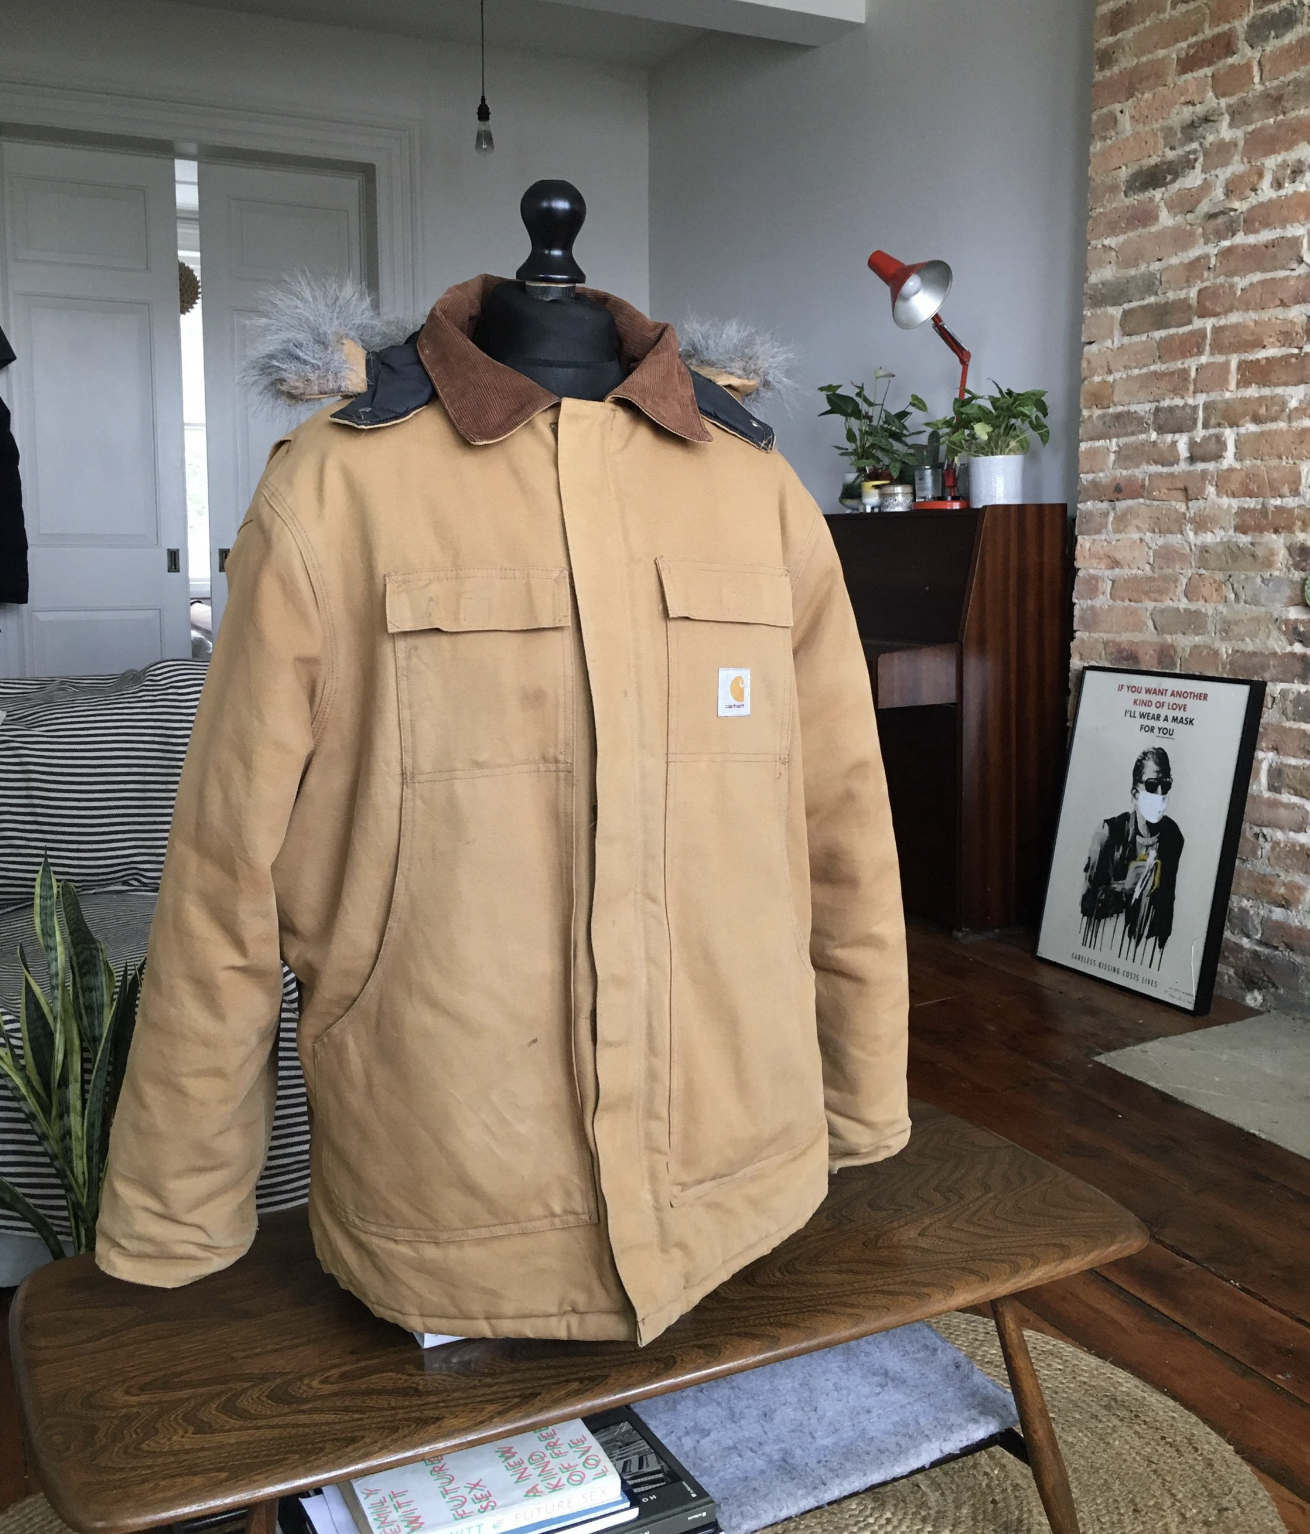 Vintage Carhartt jackets for men sourced from 12 online marketplaces.